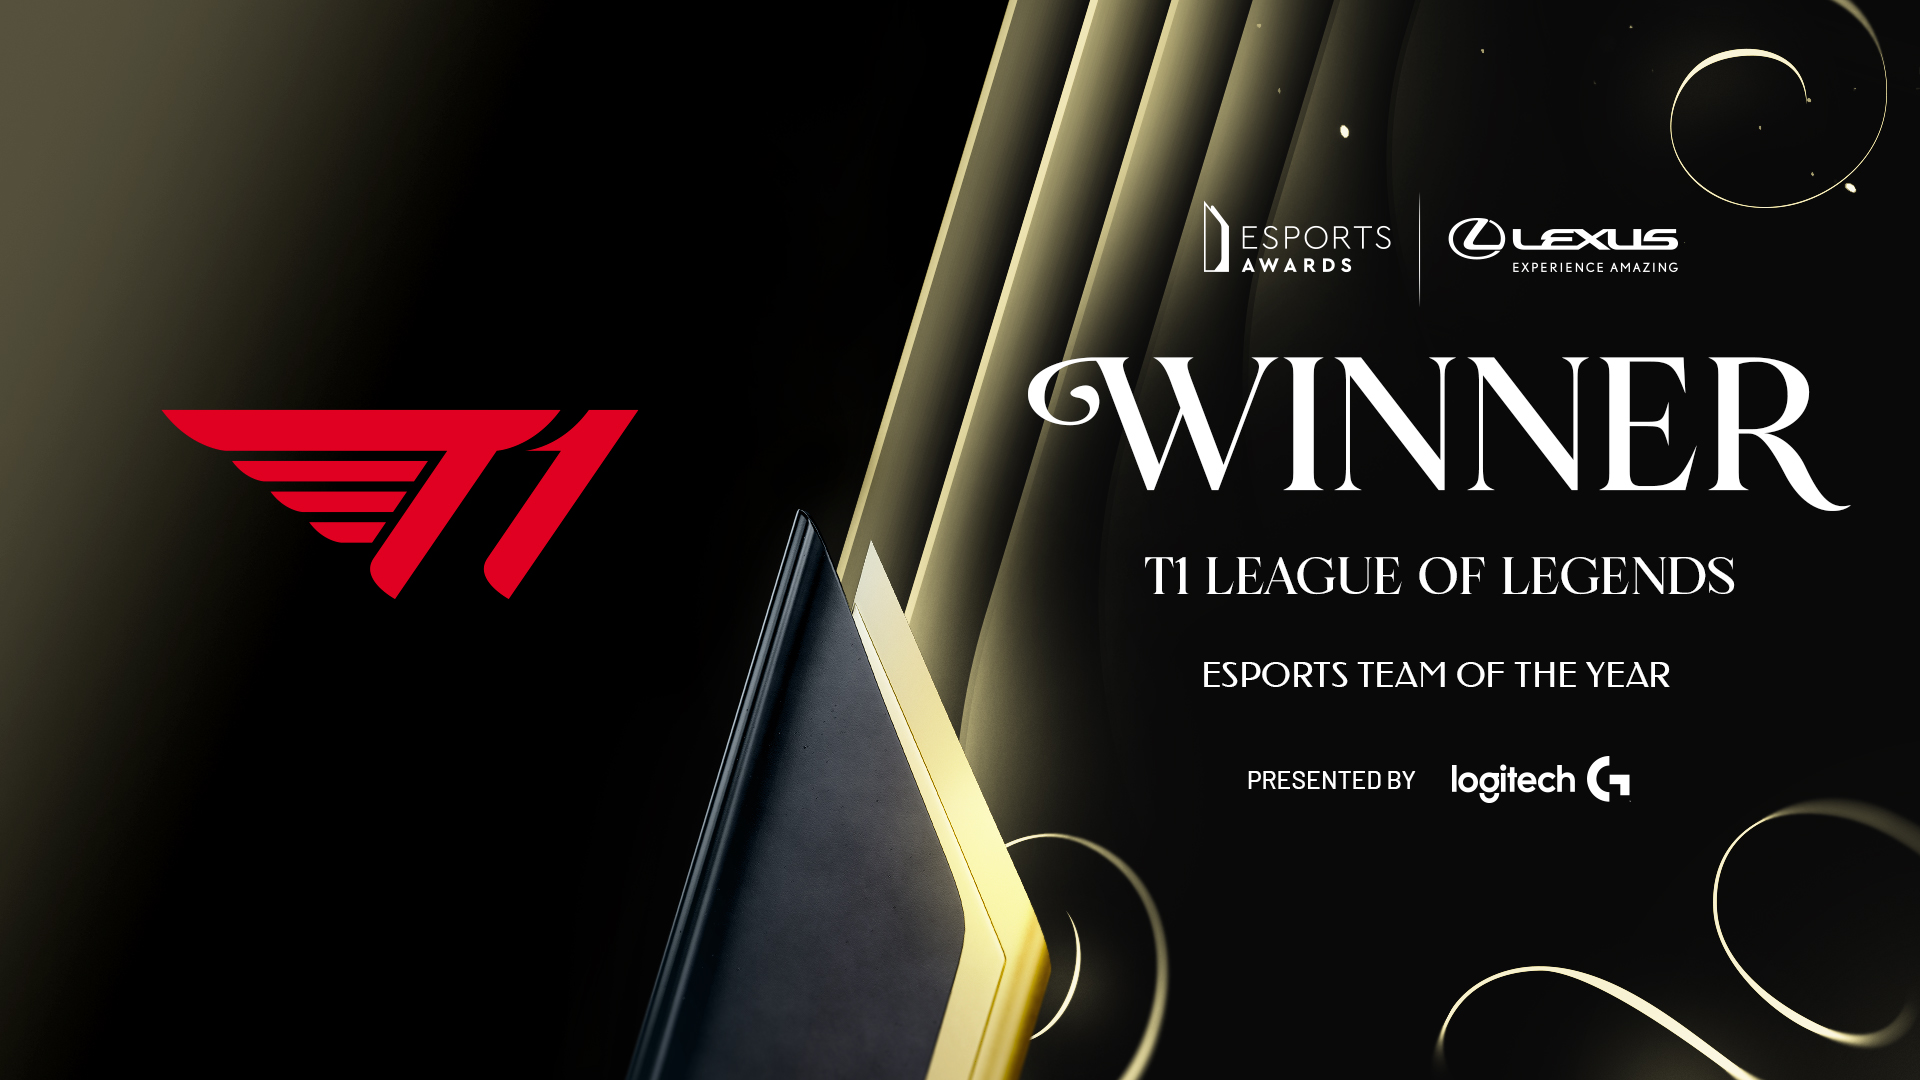 Esports Team of the Year: T1 League of Legends